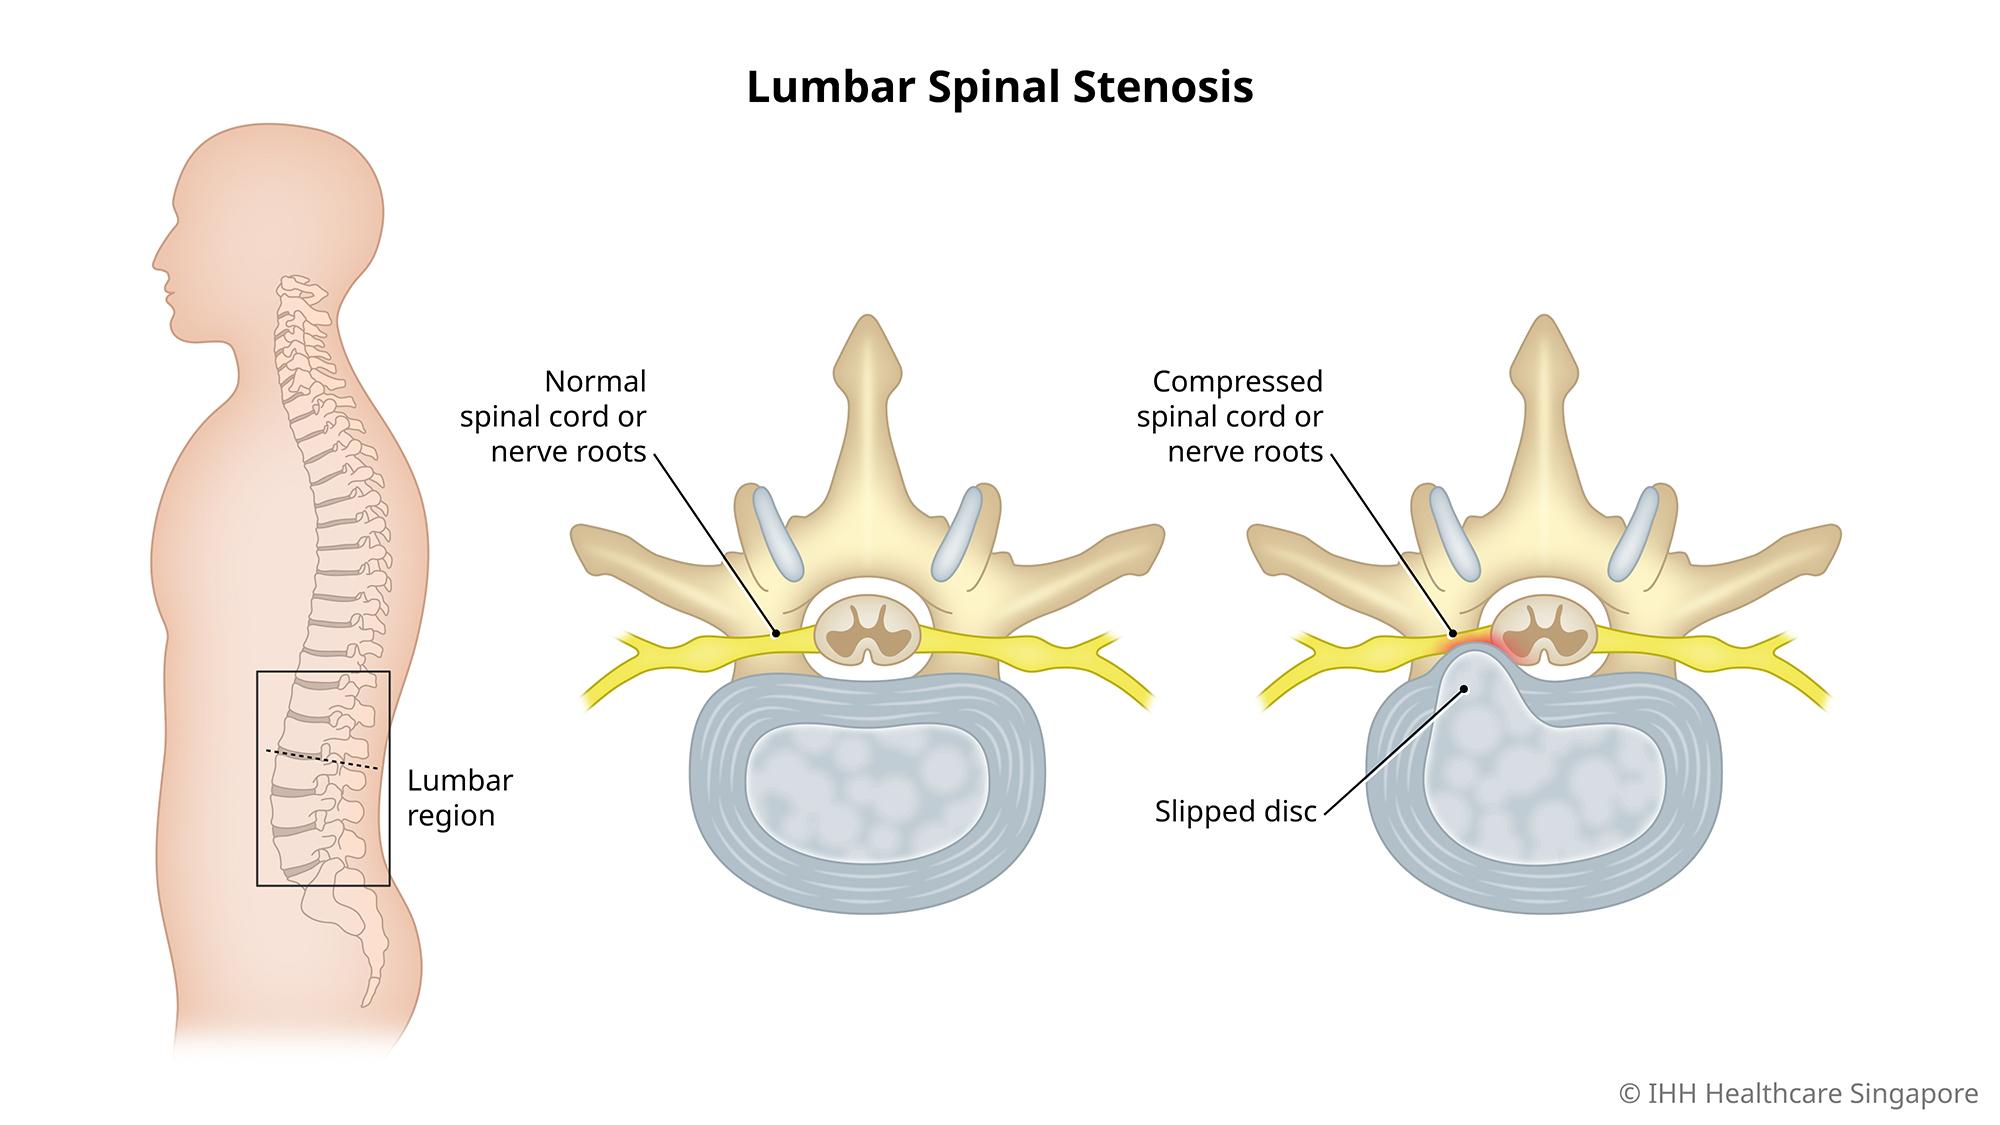 Lumbar spinal stenosis occurs when the space around the spinal cord narrows, causing back pain